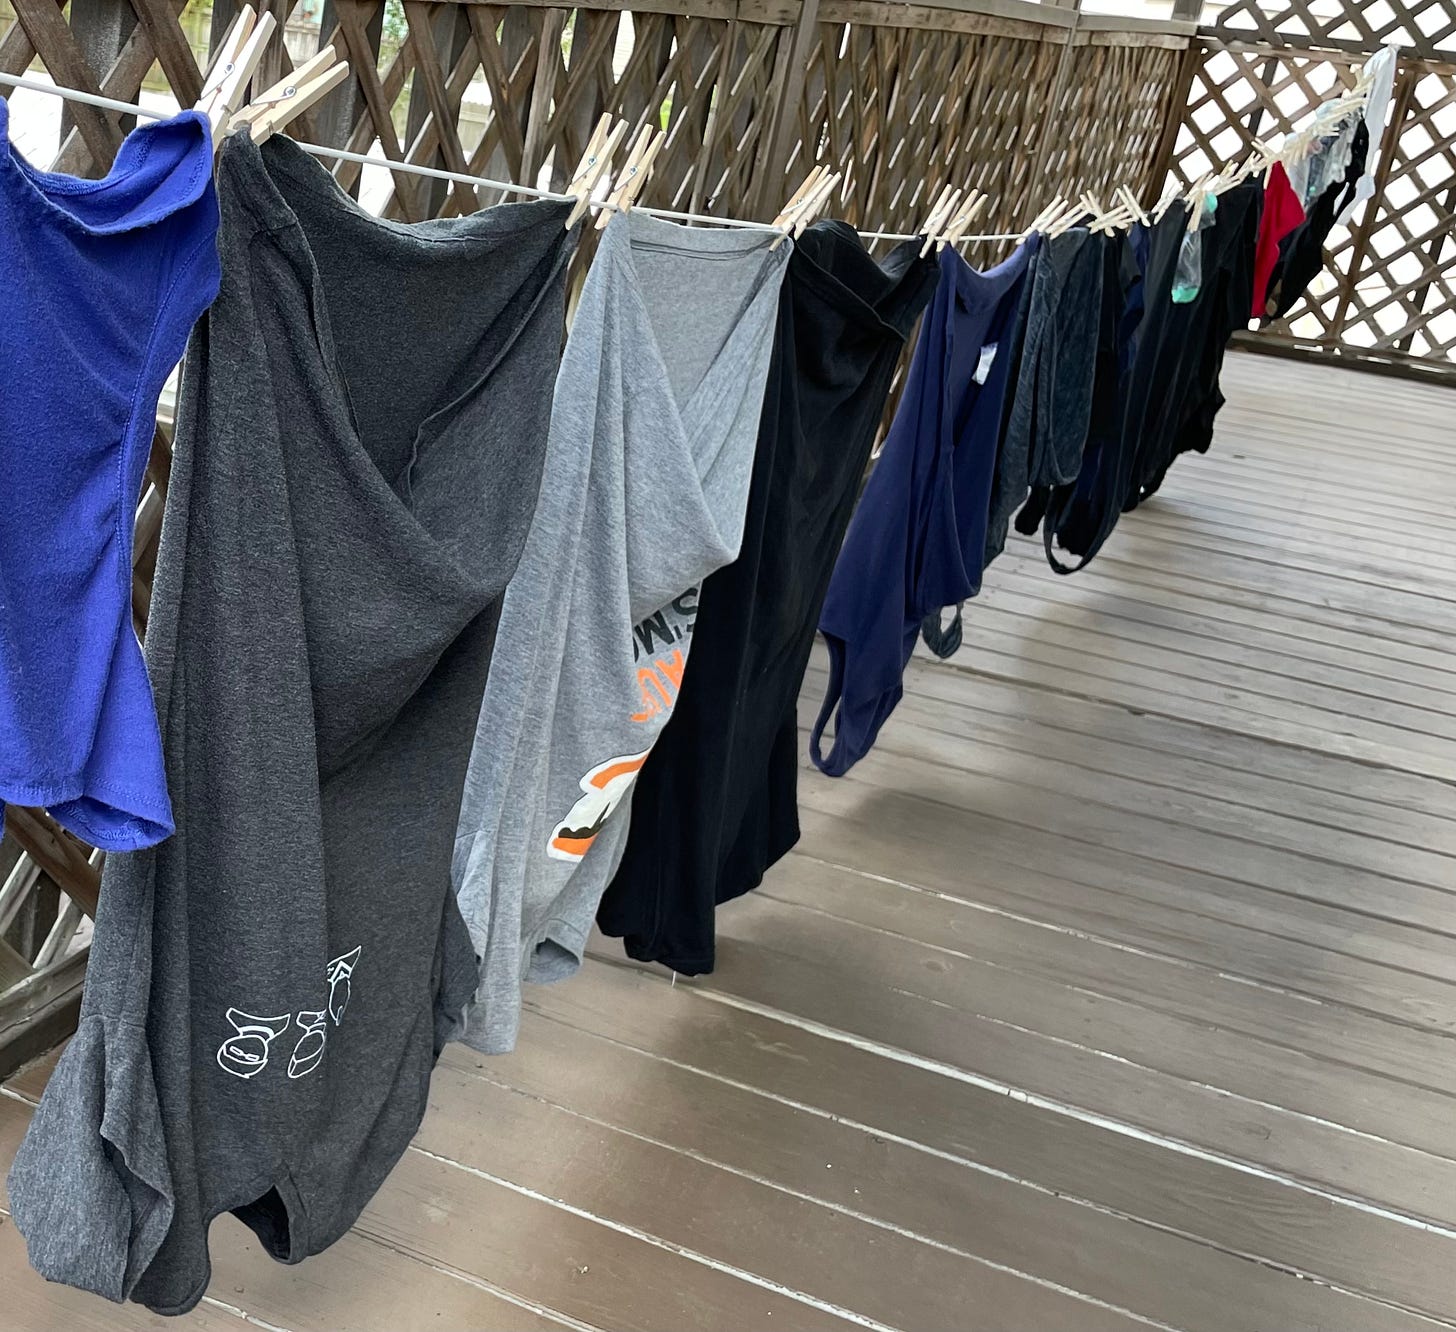 laundry drying on a clothes line